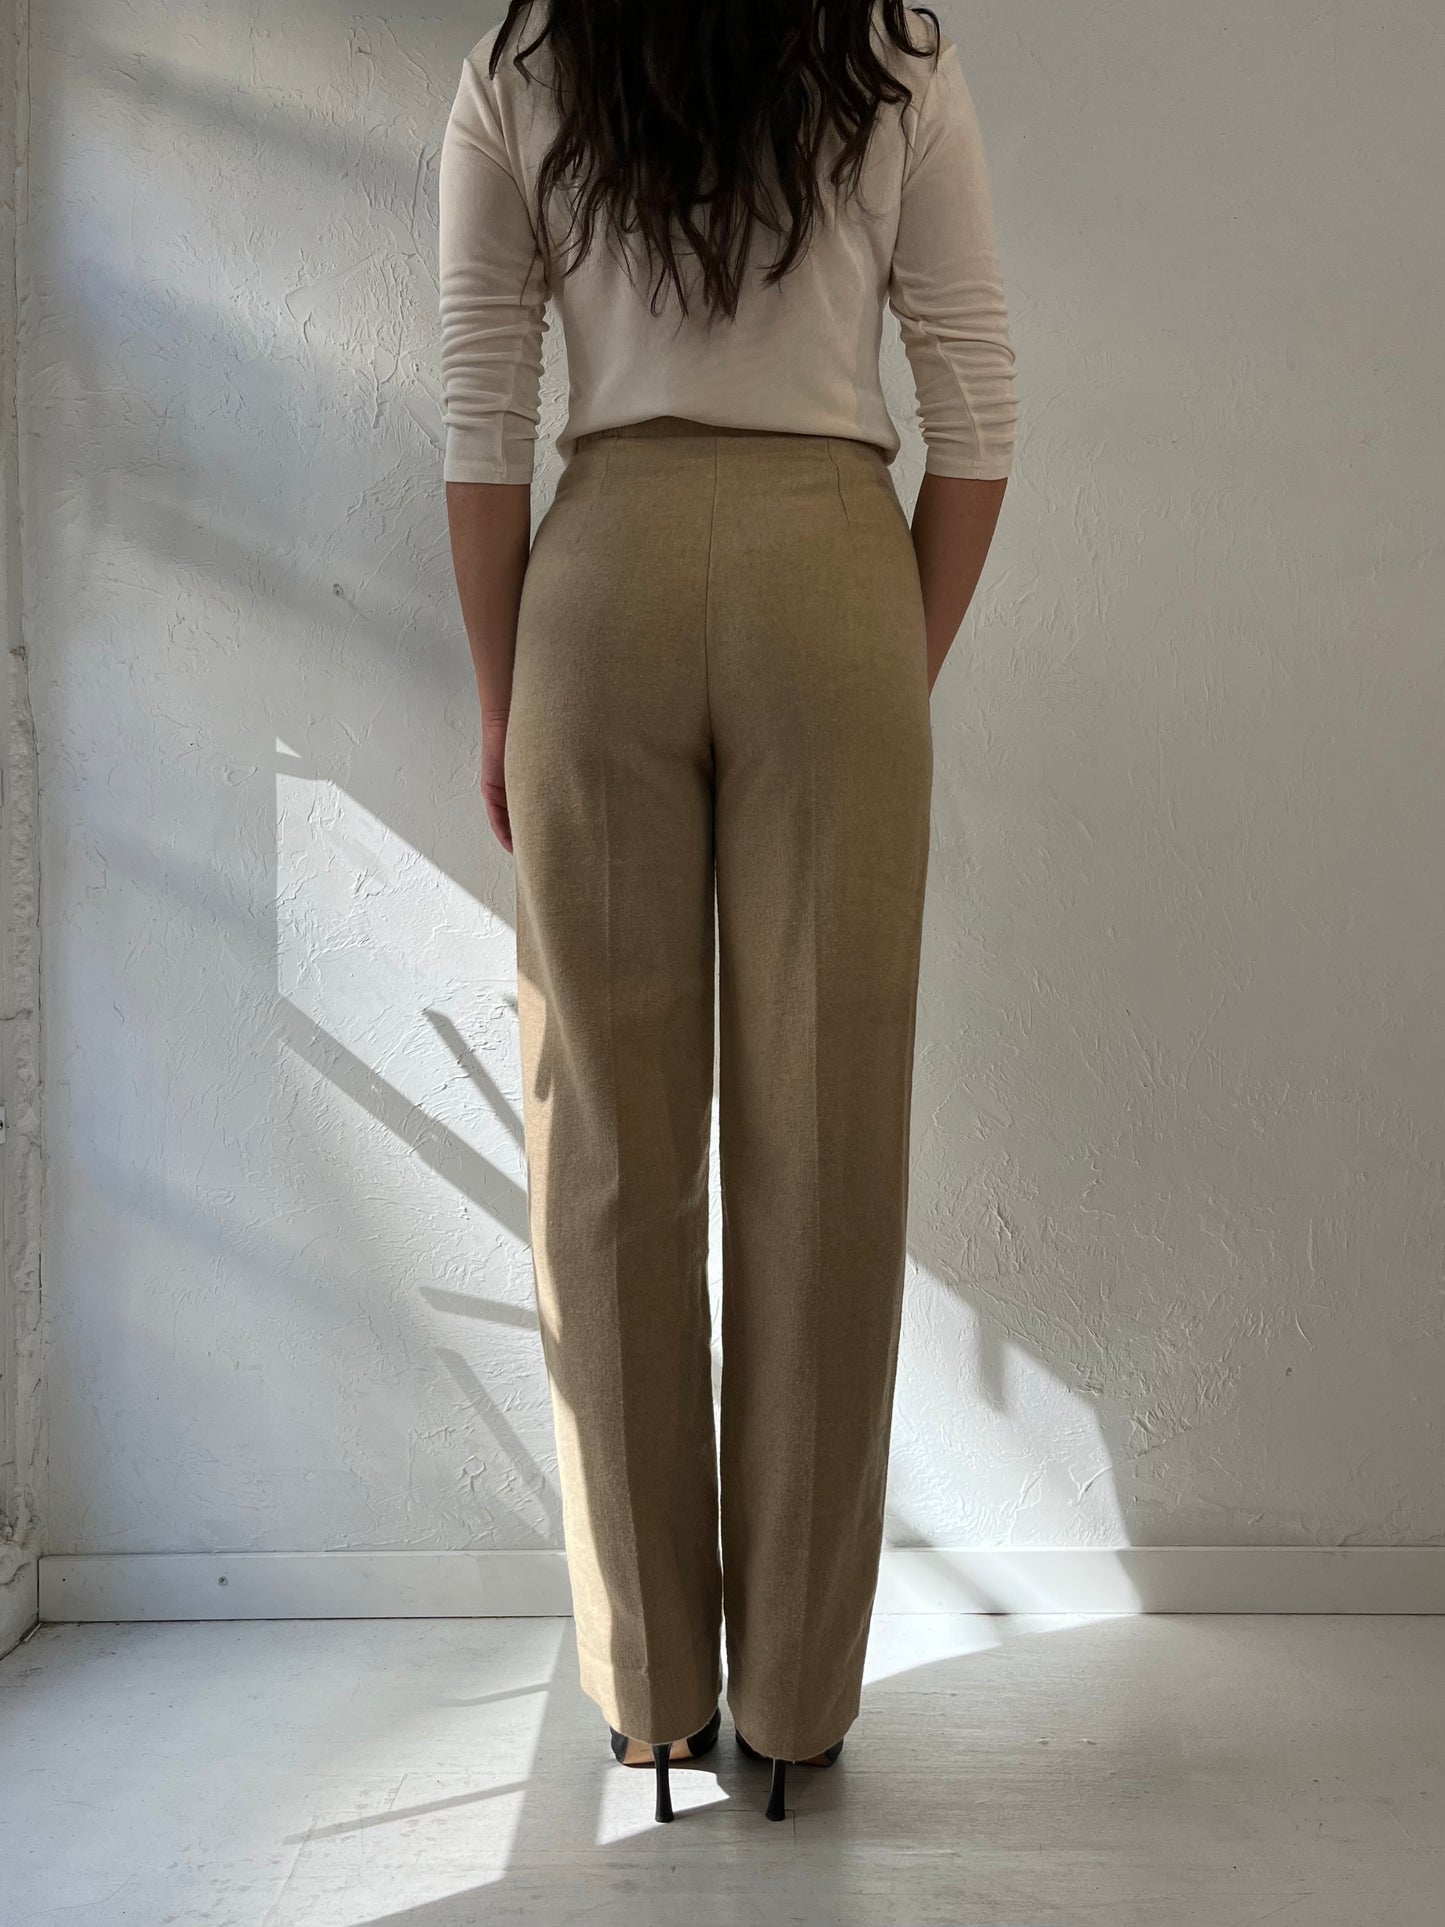 70s 'College Town' Tan Trousers / Small